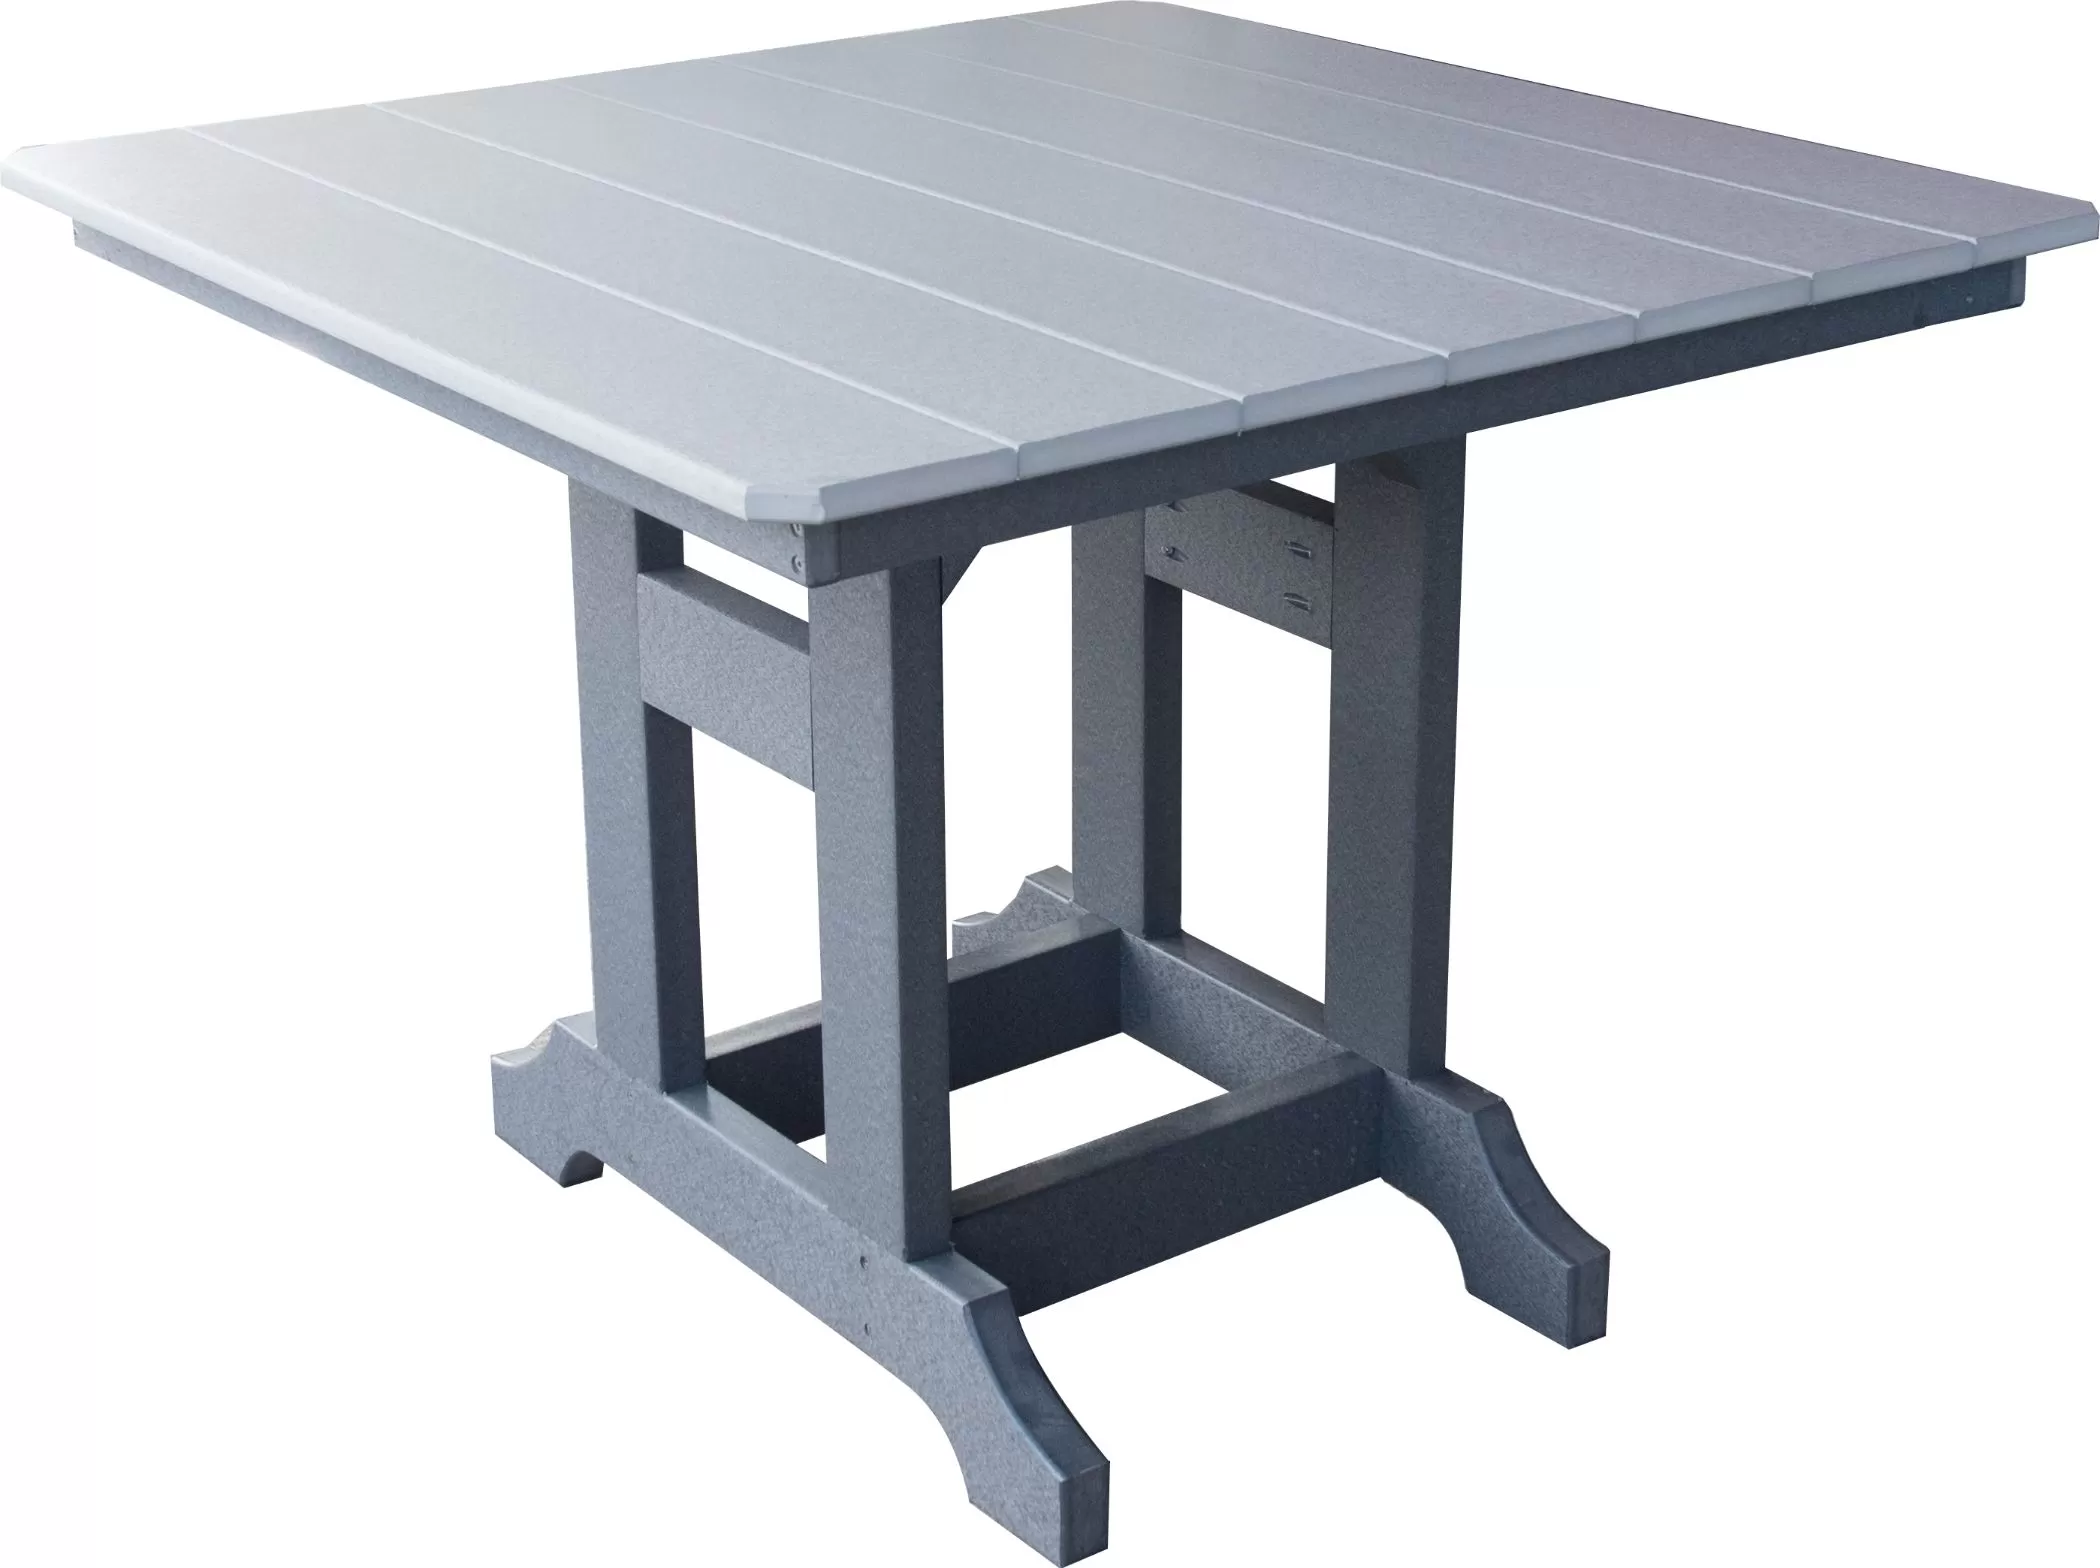 HB 44" x 44" Dining Table